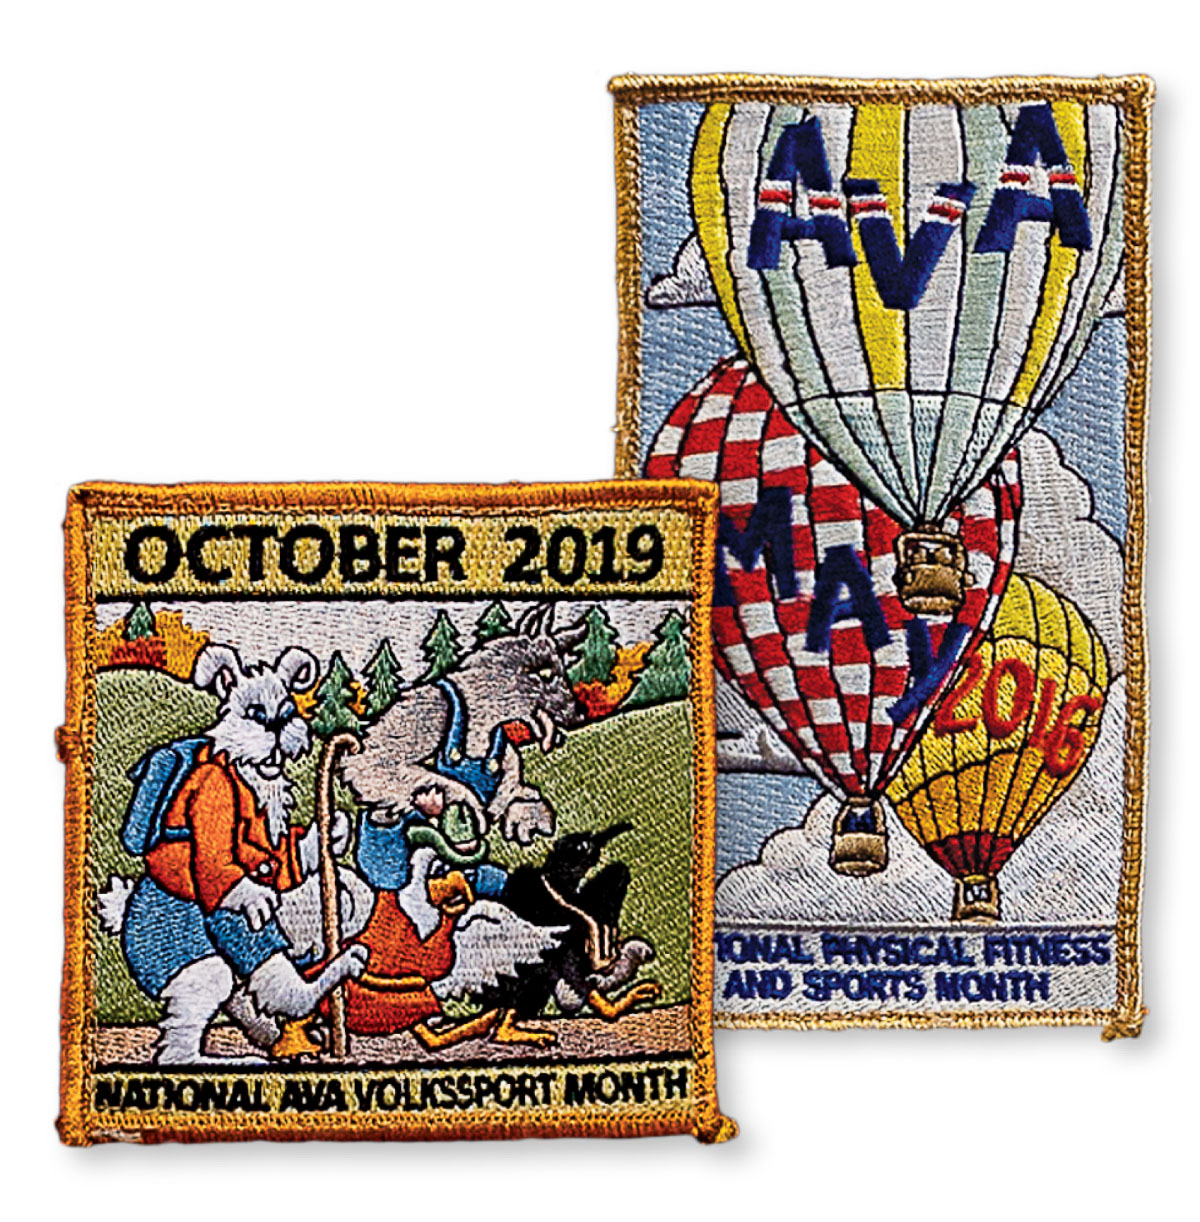 A picture of two Volksport patches, one reading "October 2019 - National Volksport Month" and a second reading "AVA National Fitness and Sports Month"